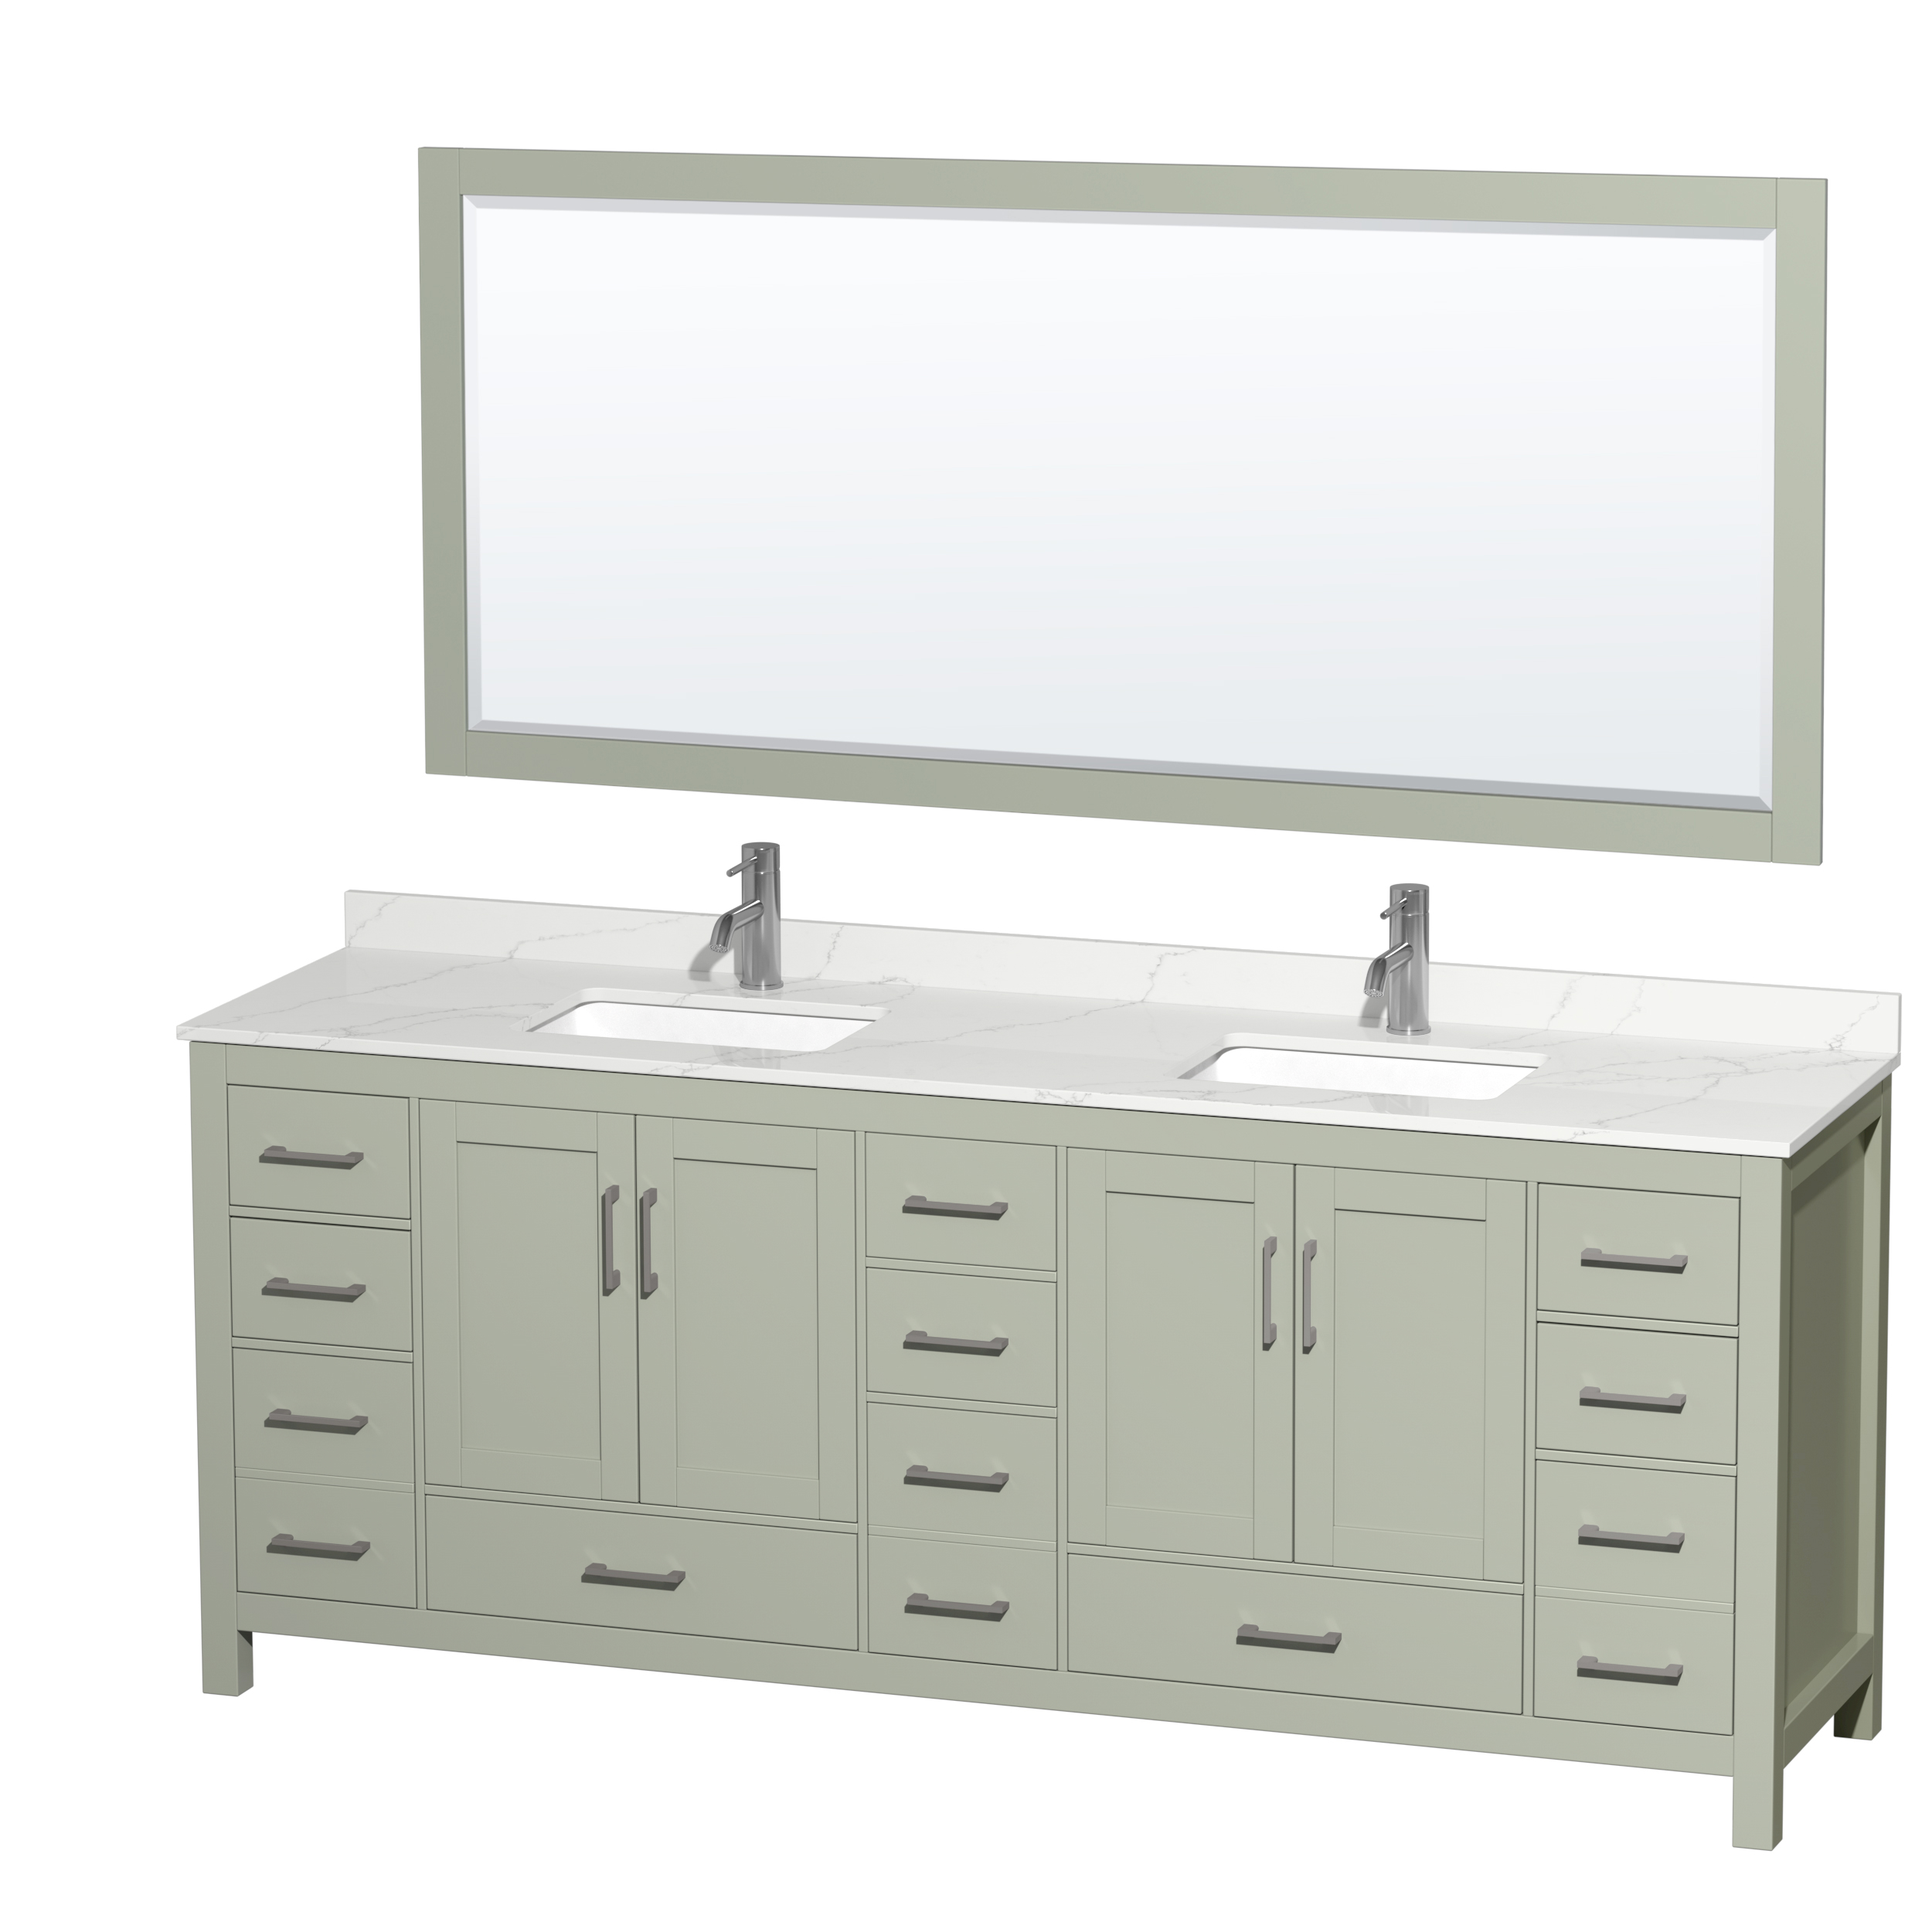 Sheffield 84" Double Bathroom Vanity by Wyndham Collection - Light Green WC-1414-84-DBL-VAN-LGN